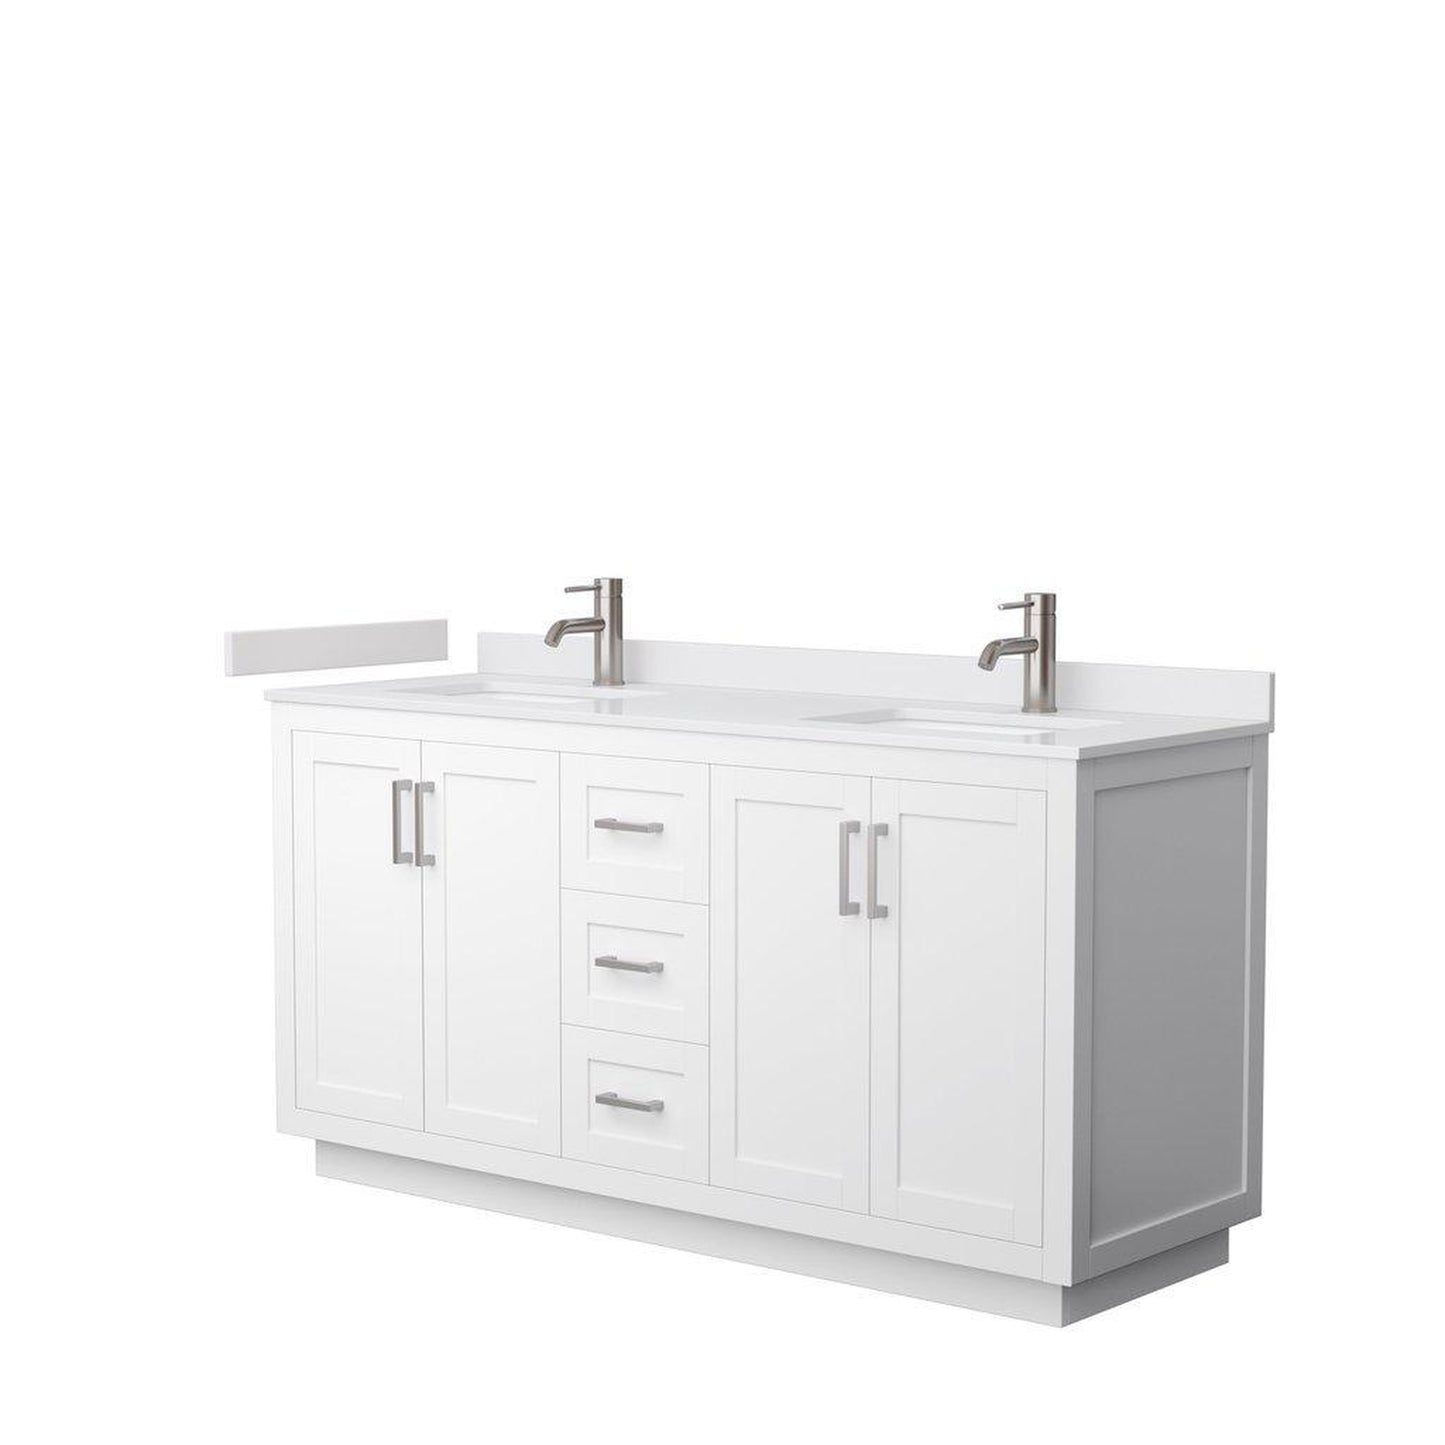 Wyndham Collection Miranda 66" Double Bathroom White Vanity Set With White Cultured Marble Countertop, Undermount Square Sink, And Brushed Nickel Trim